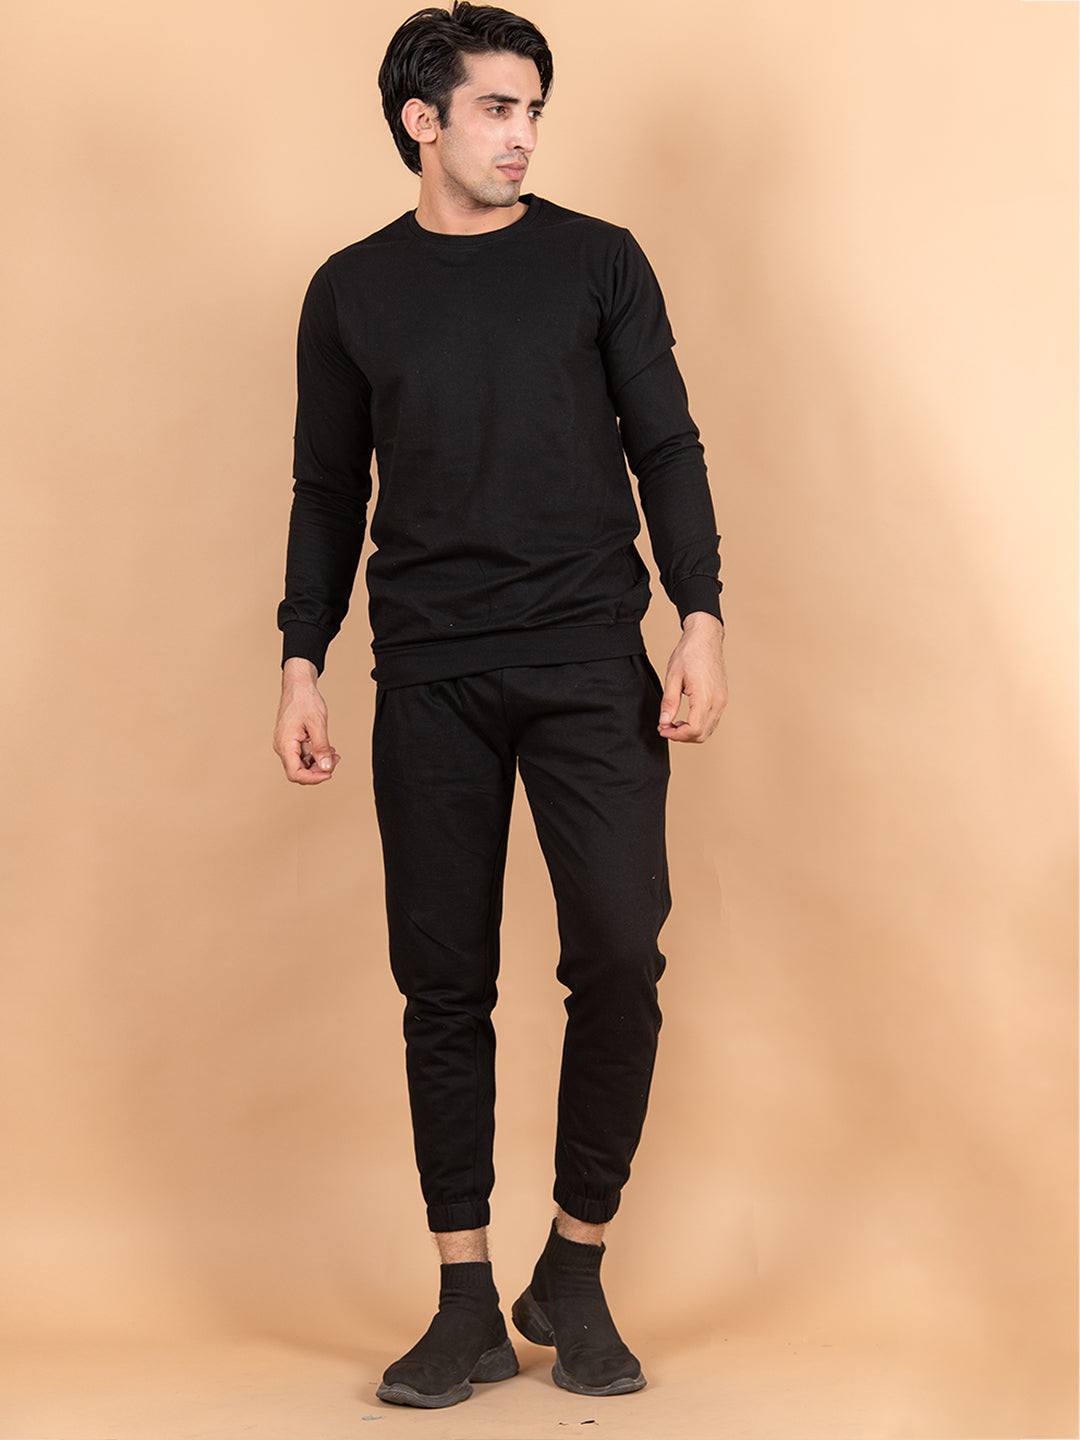 Buy Solid Black Sweatshirt Pattern with Joggers Co-Ord Set online